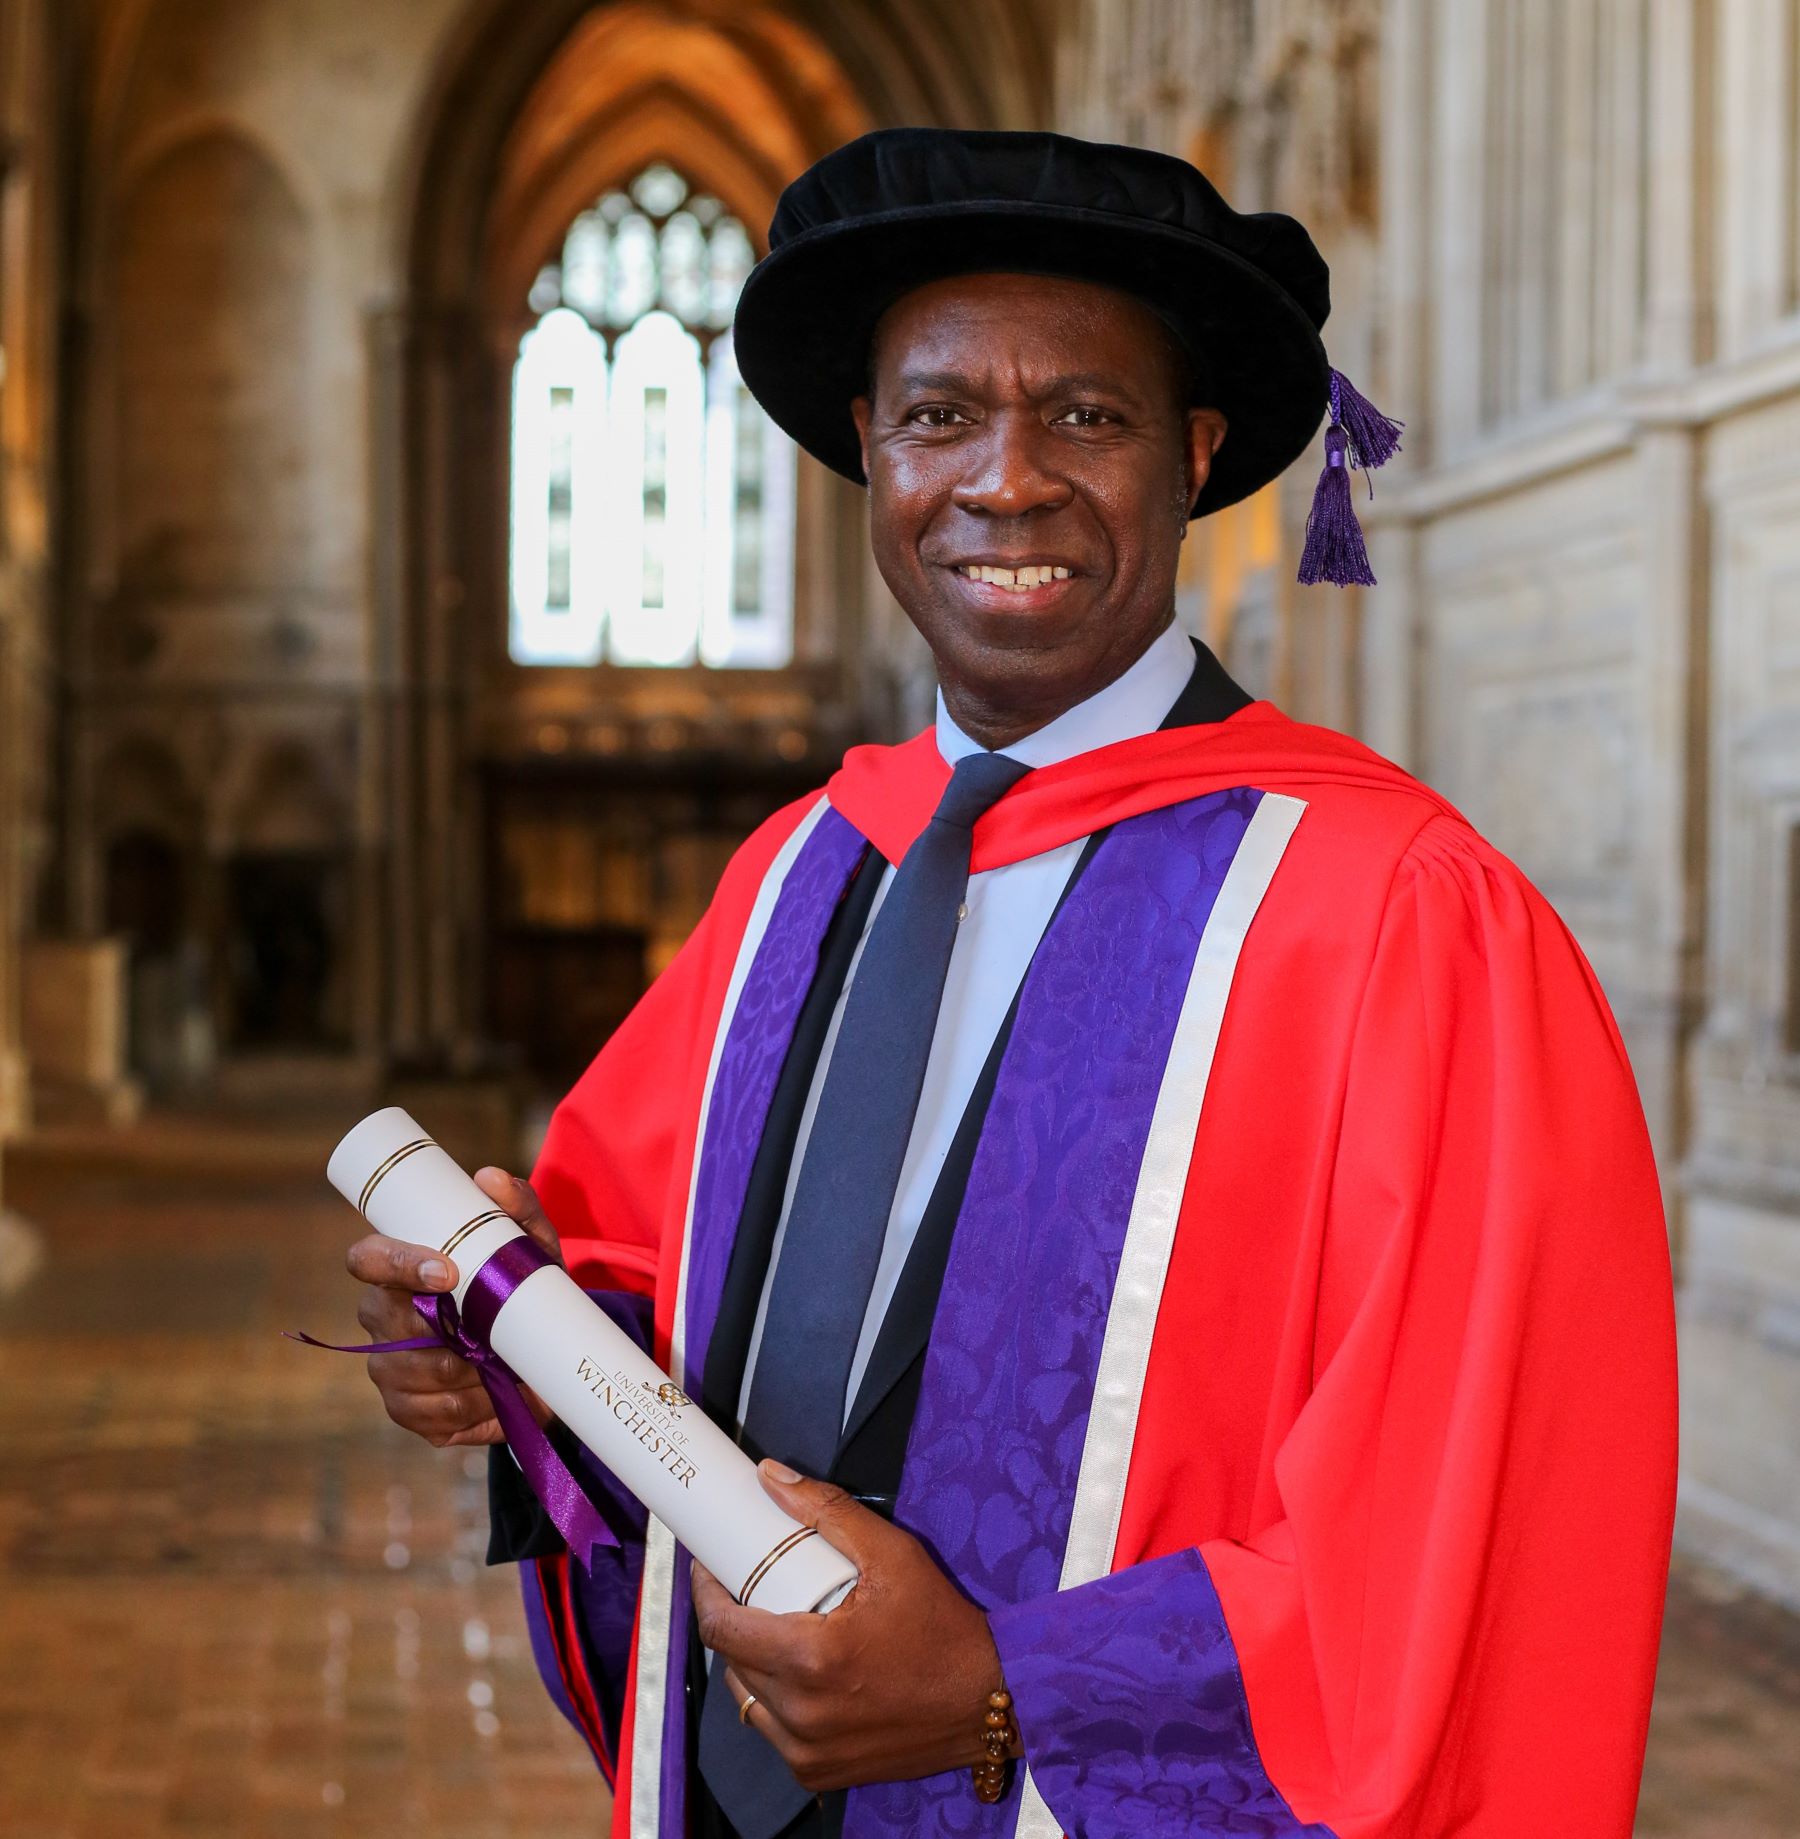 BBC newsman Clive Myrie in red graduation robes